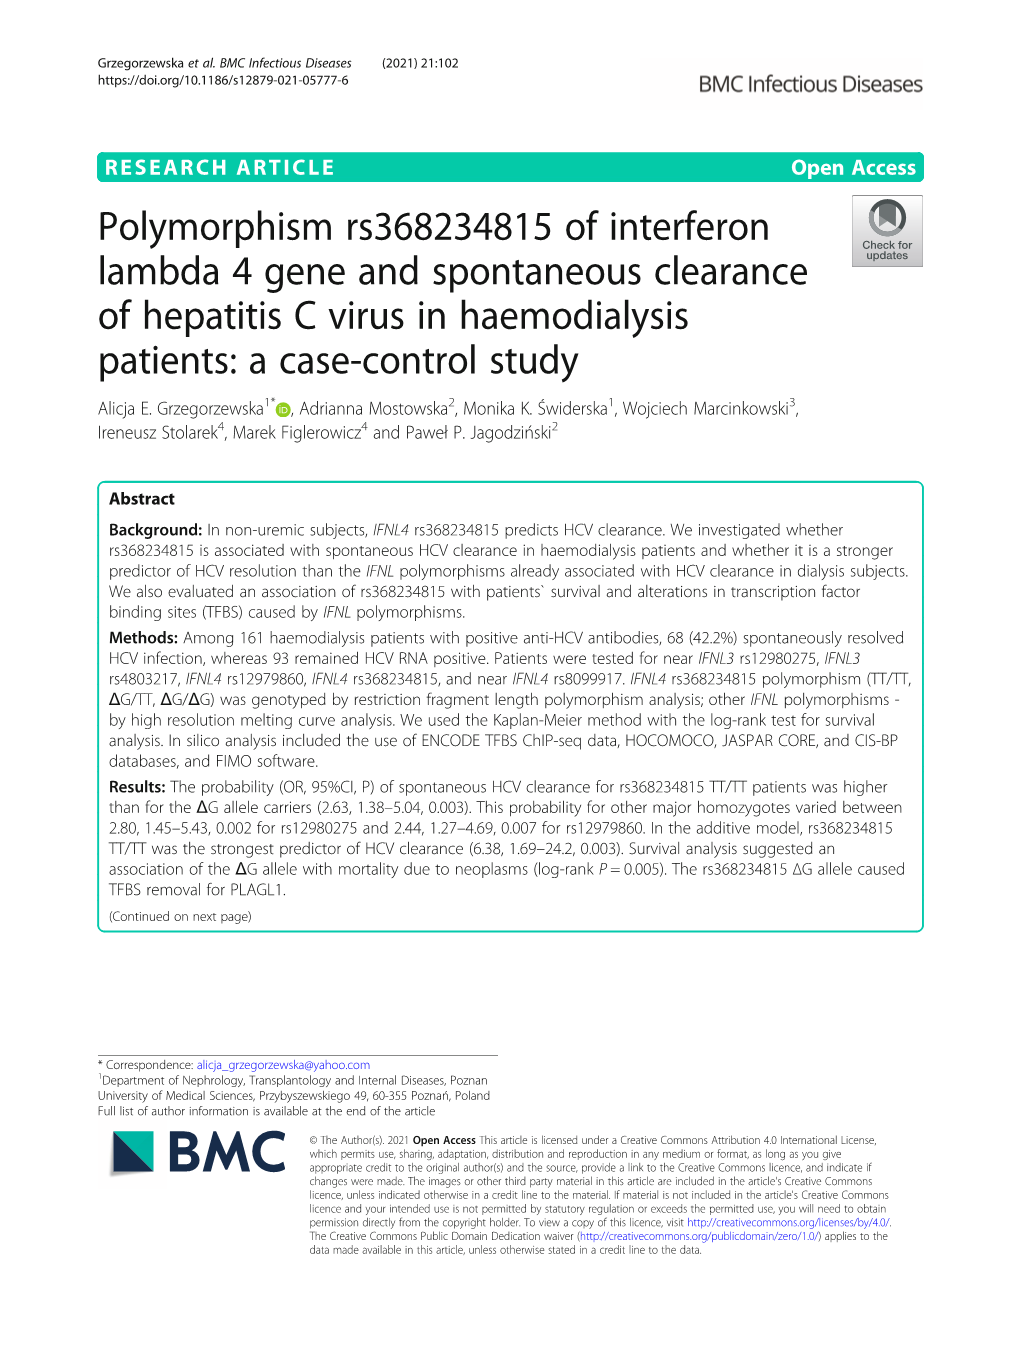 Polymorphism Rs368234815 of Interferon Lambda 4 Gene and Spontaneous Clearance of Hepatitis C Virus in Haemodialysis Patients: a Case-Control Study Alicja E